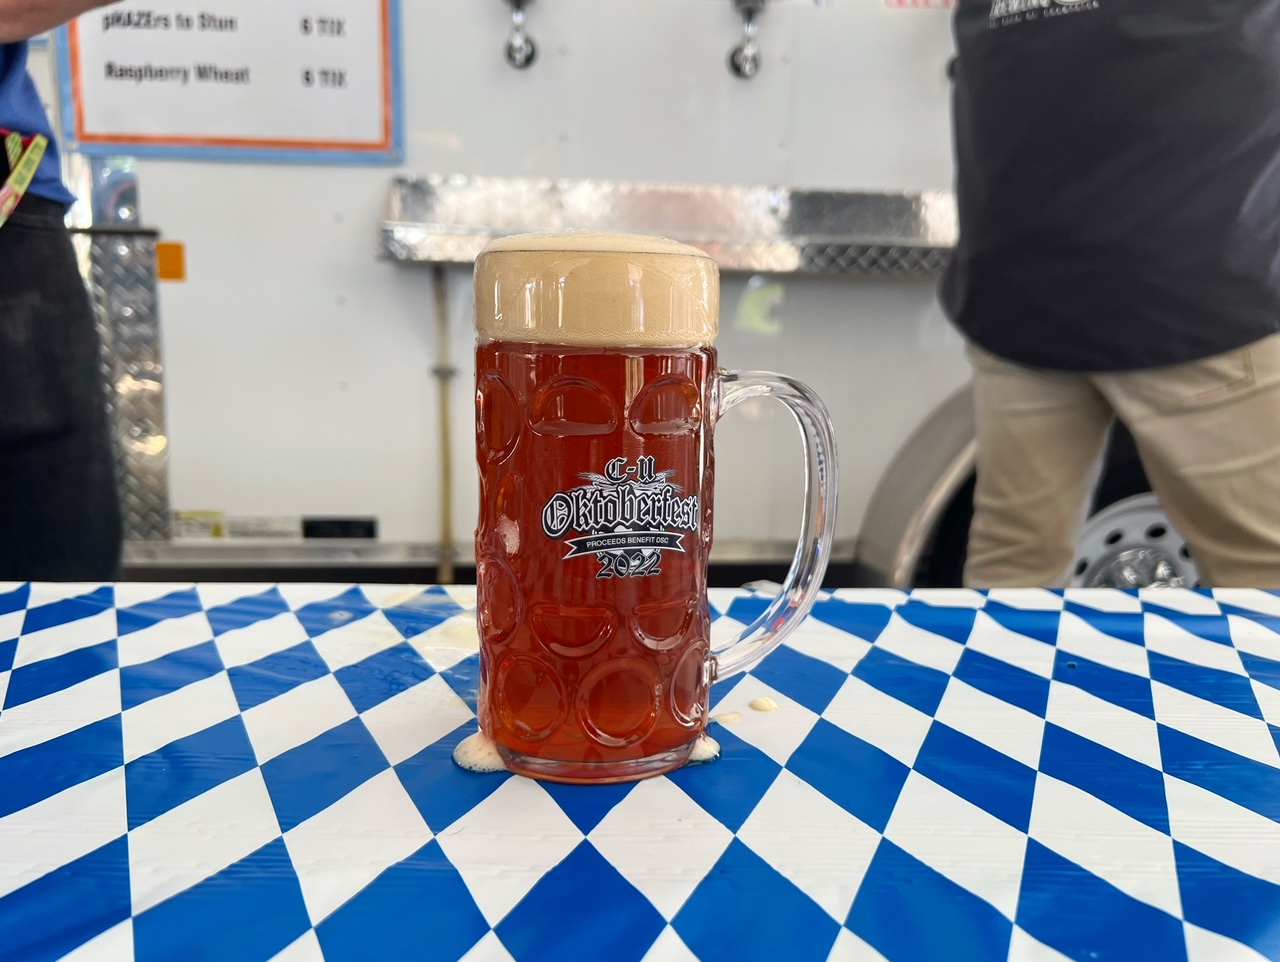 A clear beer stein filled with a dark amber colored lager and a head of foam sits on a table with a blue and white patterened tablecloth.